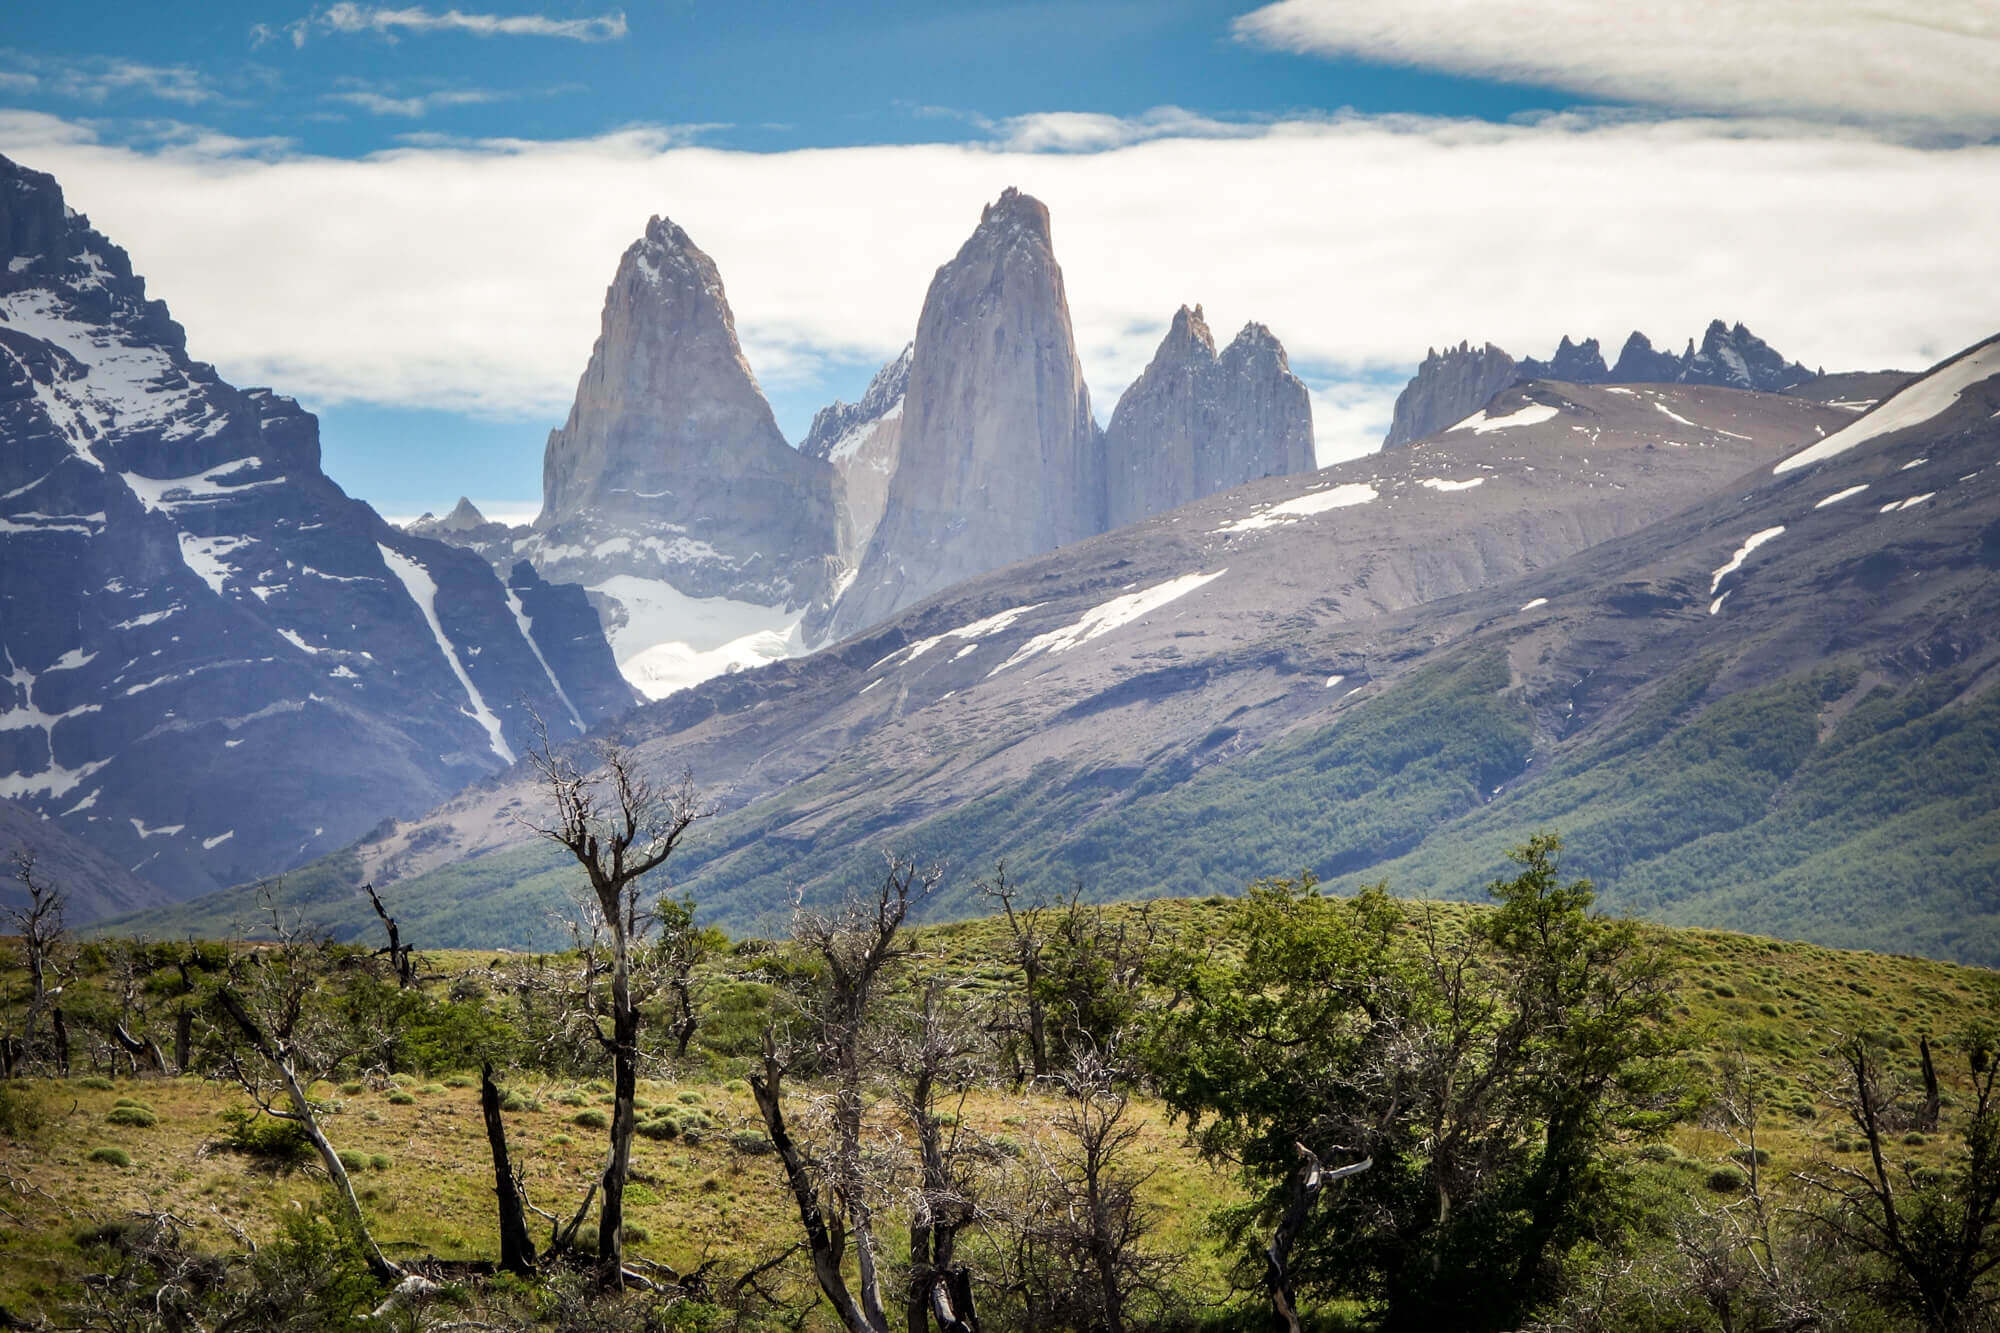 The Torres Patagonia from afar